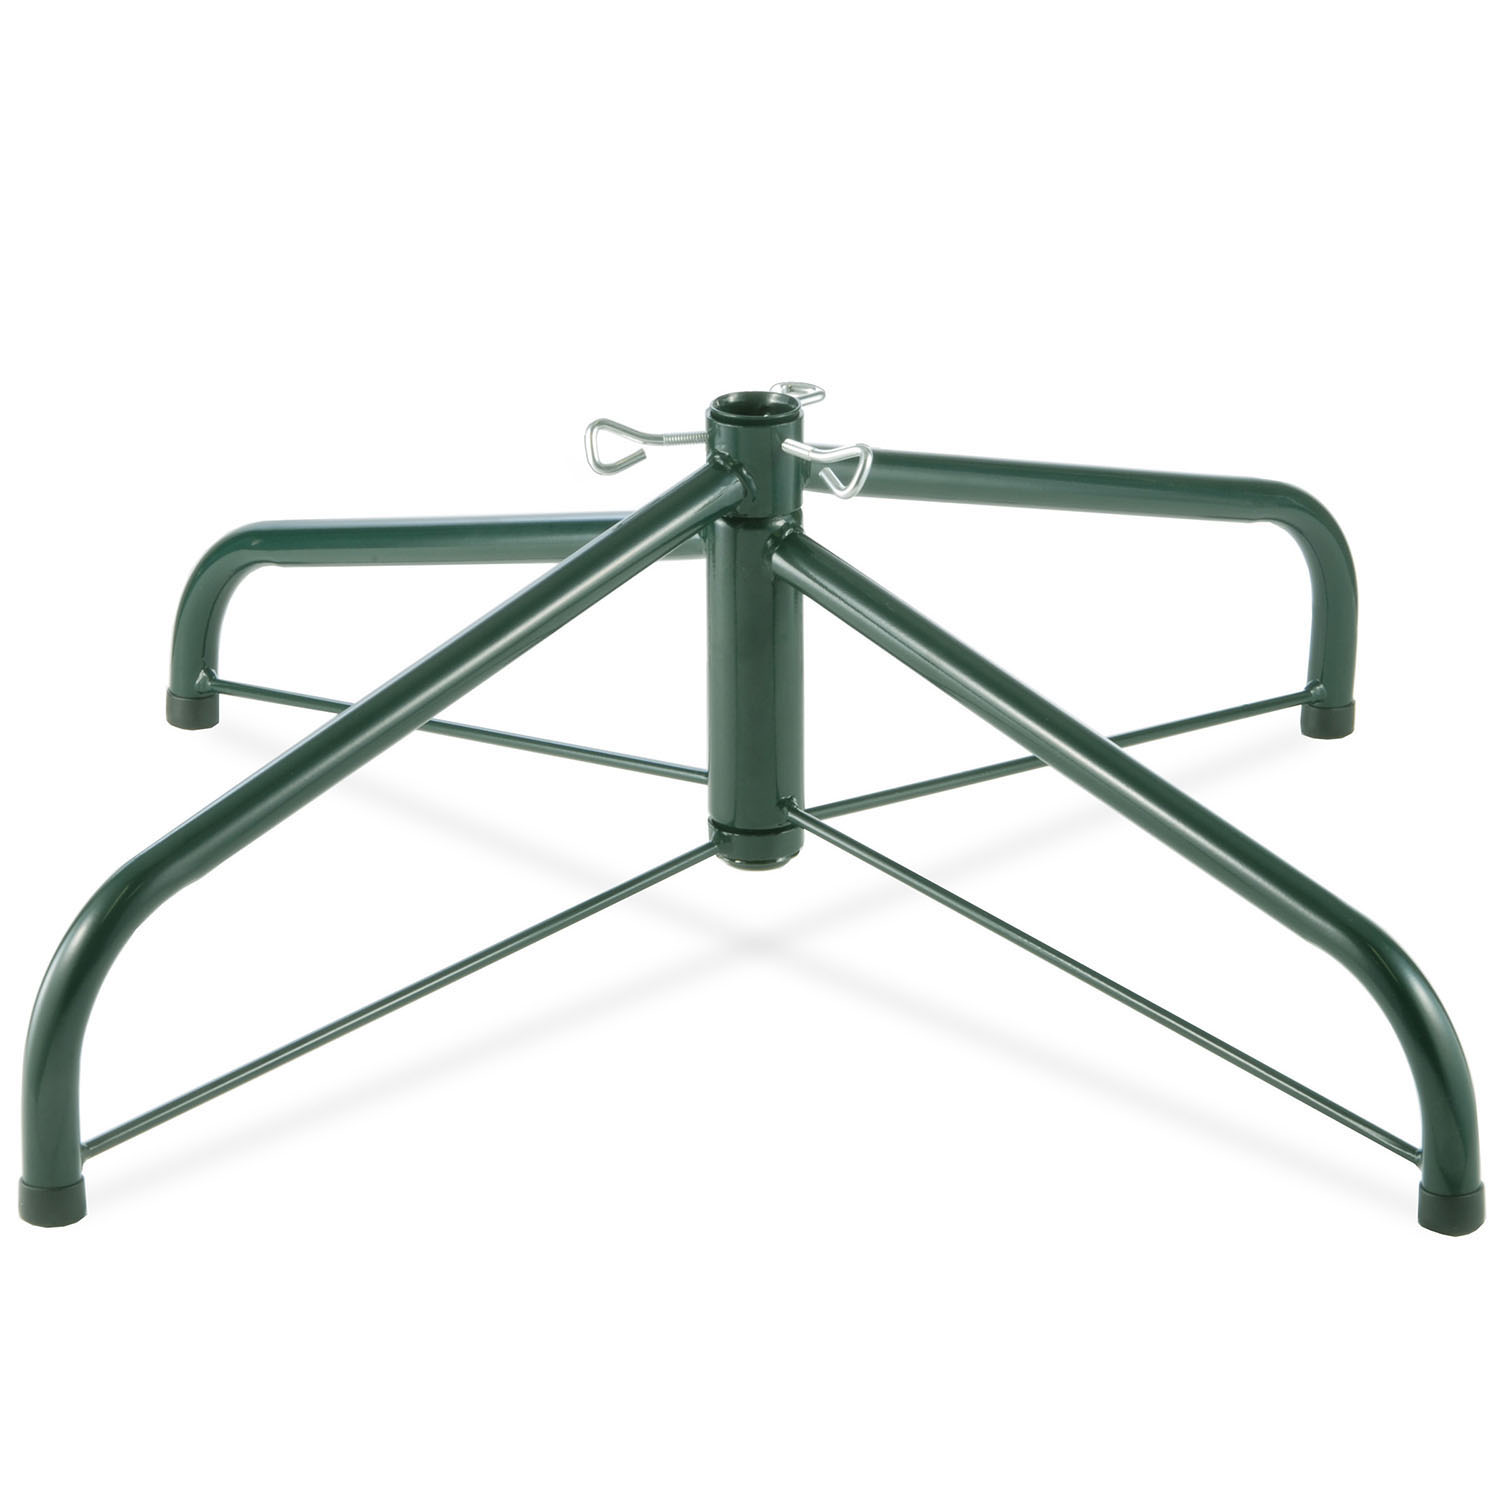 32 Inch Folding Tree Stand For 9 Foot To 12 Foot Trees: 1.25 Inch Pole